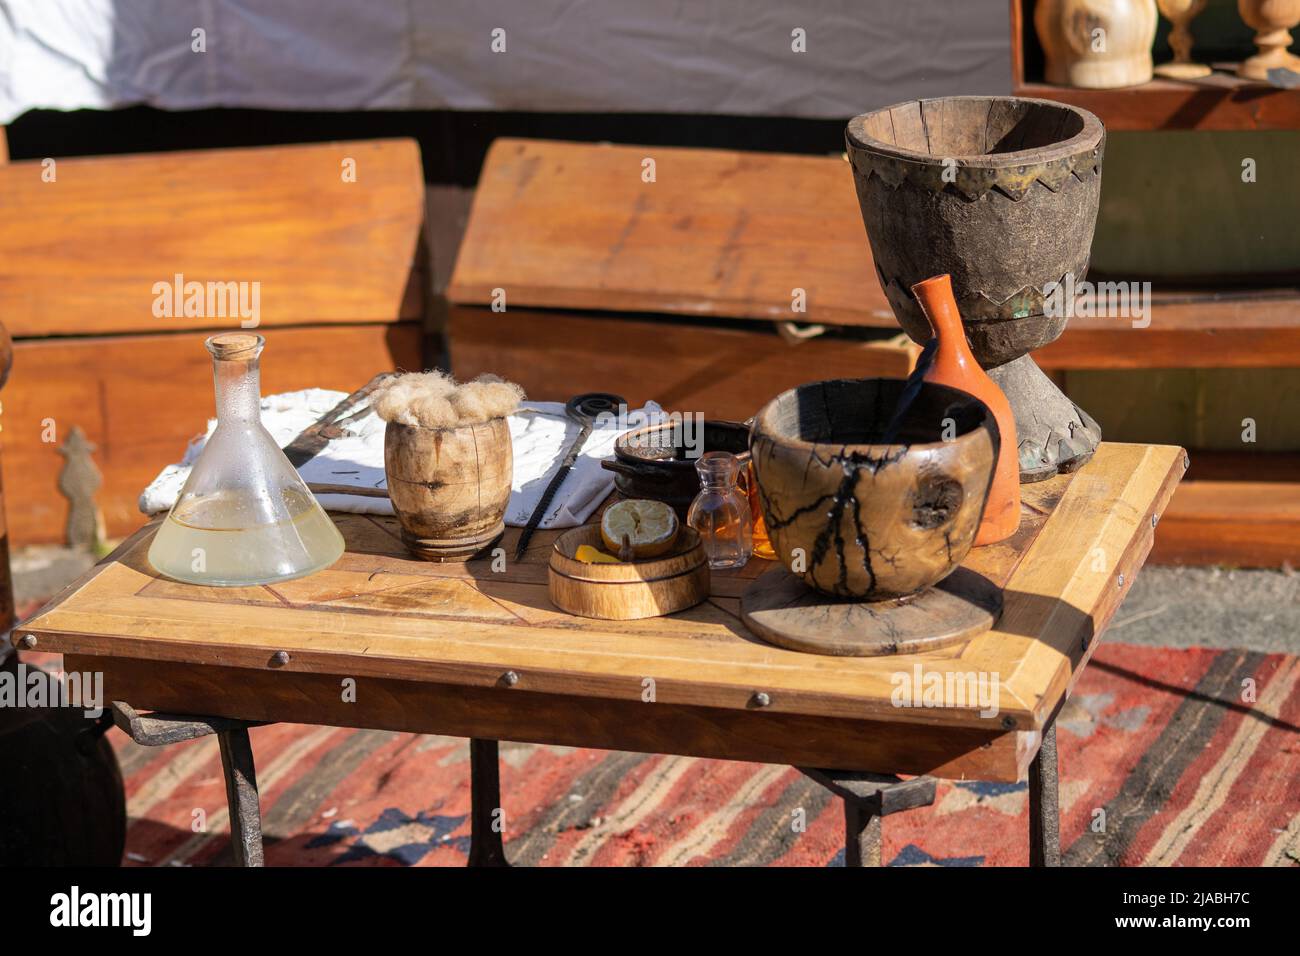 Ancient or vintage handmade tools and wood cups from Roman times. Braga Romana event in North Portugal. Recreational fairs from ancient periods. Stock Photo